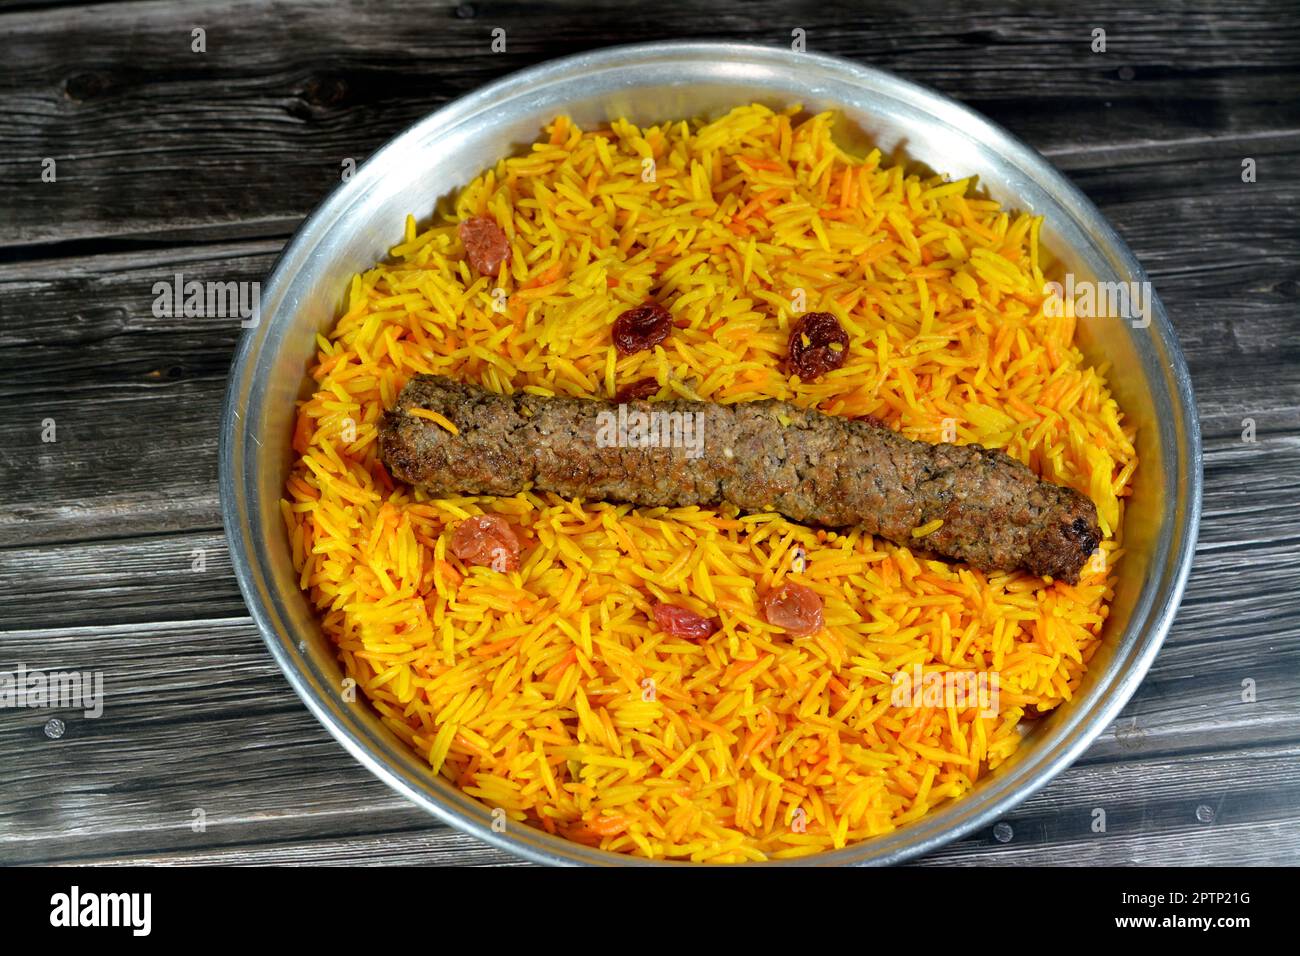 Arabic cuisine traditional food beef  Kofta, kebab and tarb kofta shish which is minced meat with Basmati rice and raisins, oriental grilled barbecued Stock Photo